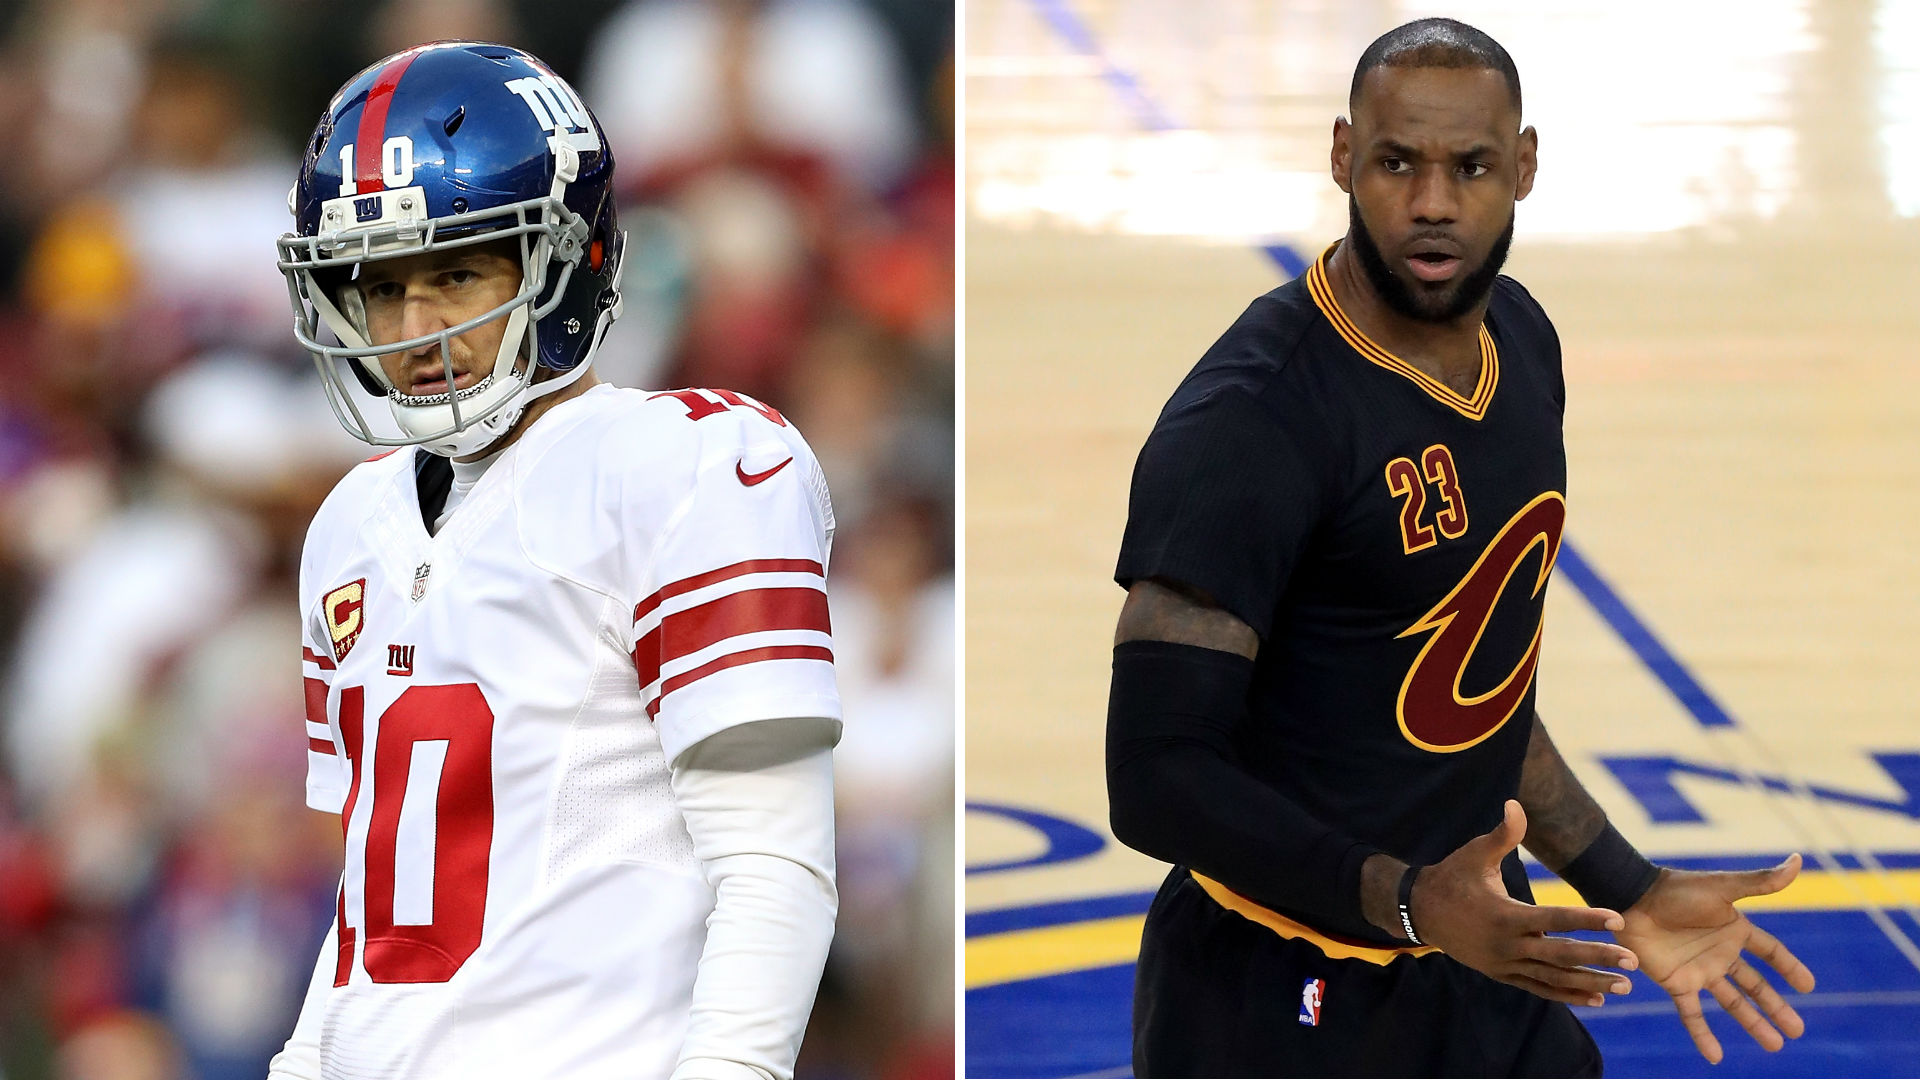 Giants teammate explains why Eli Manning is similar to LeBron James | Sporting News Canada